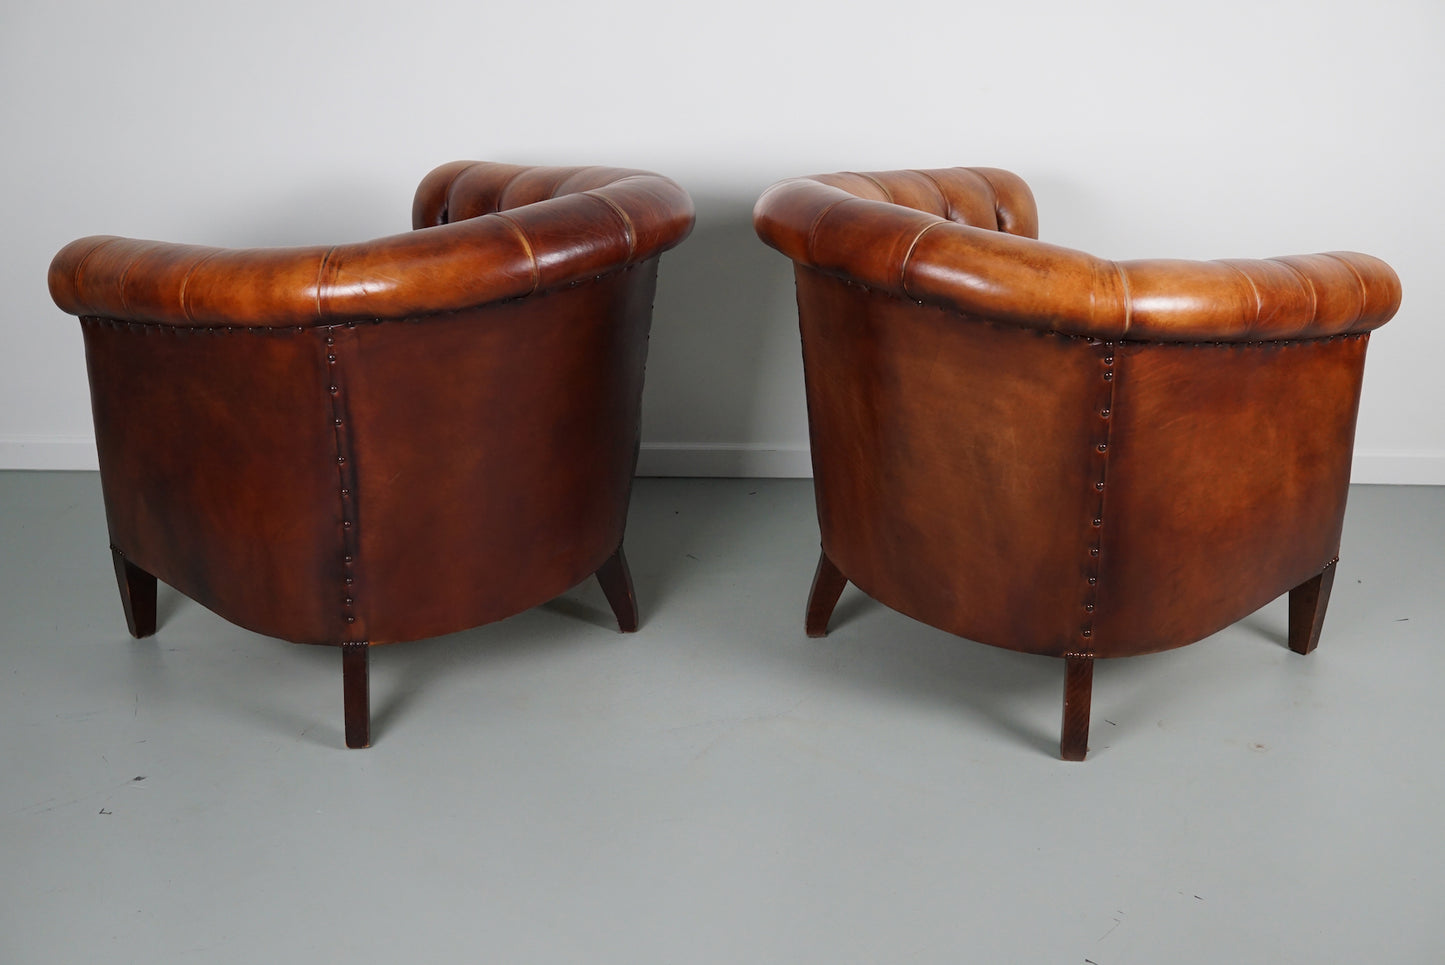 Vintage Dutch Chesterfield Cognac Leather Club Chairs, Set of 2